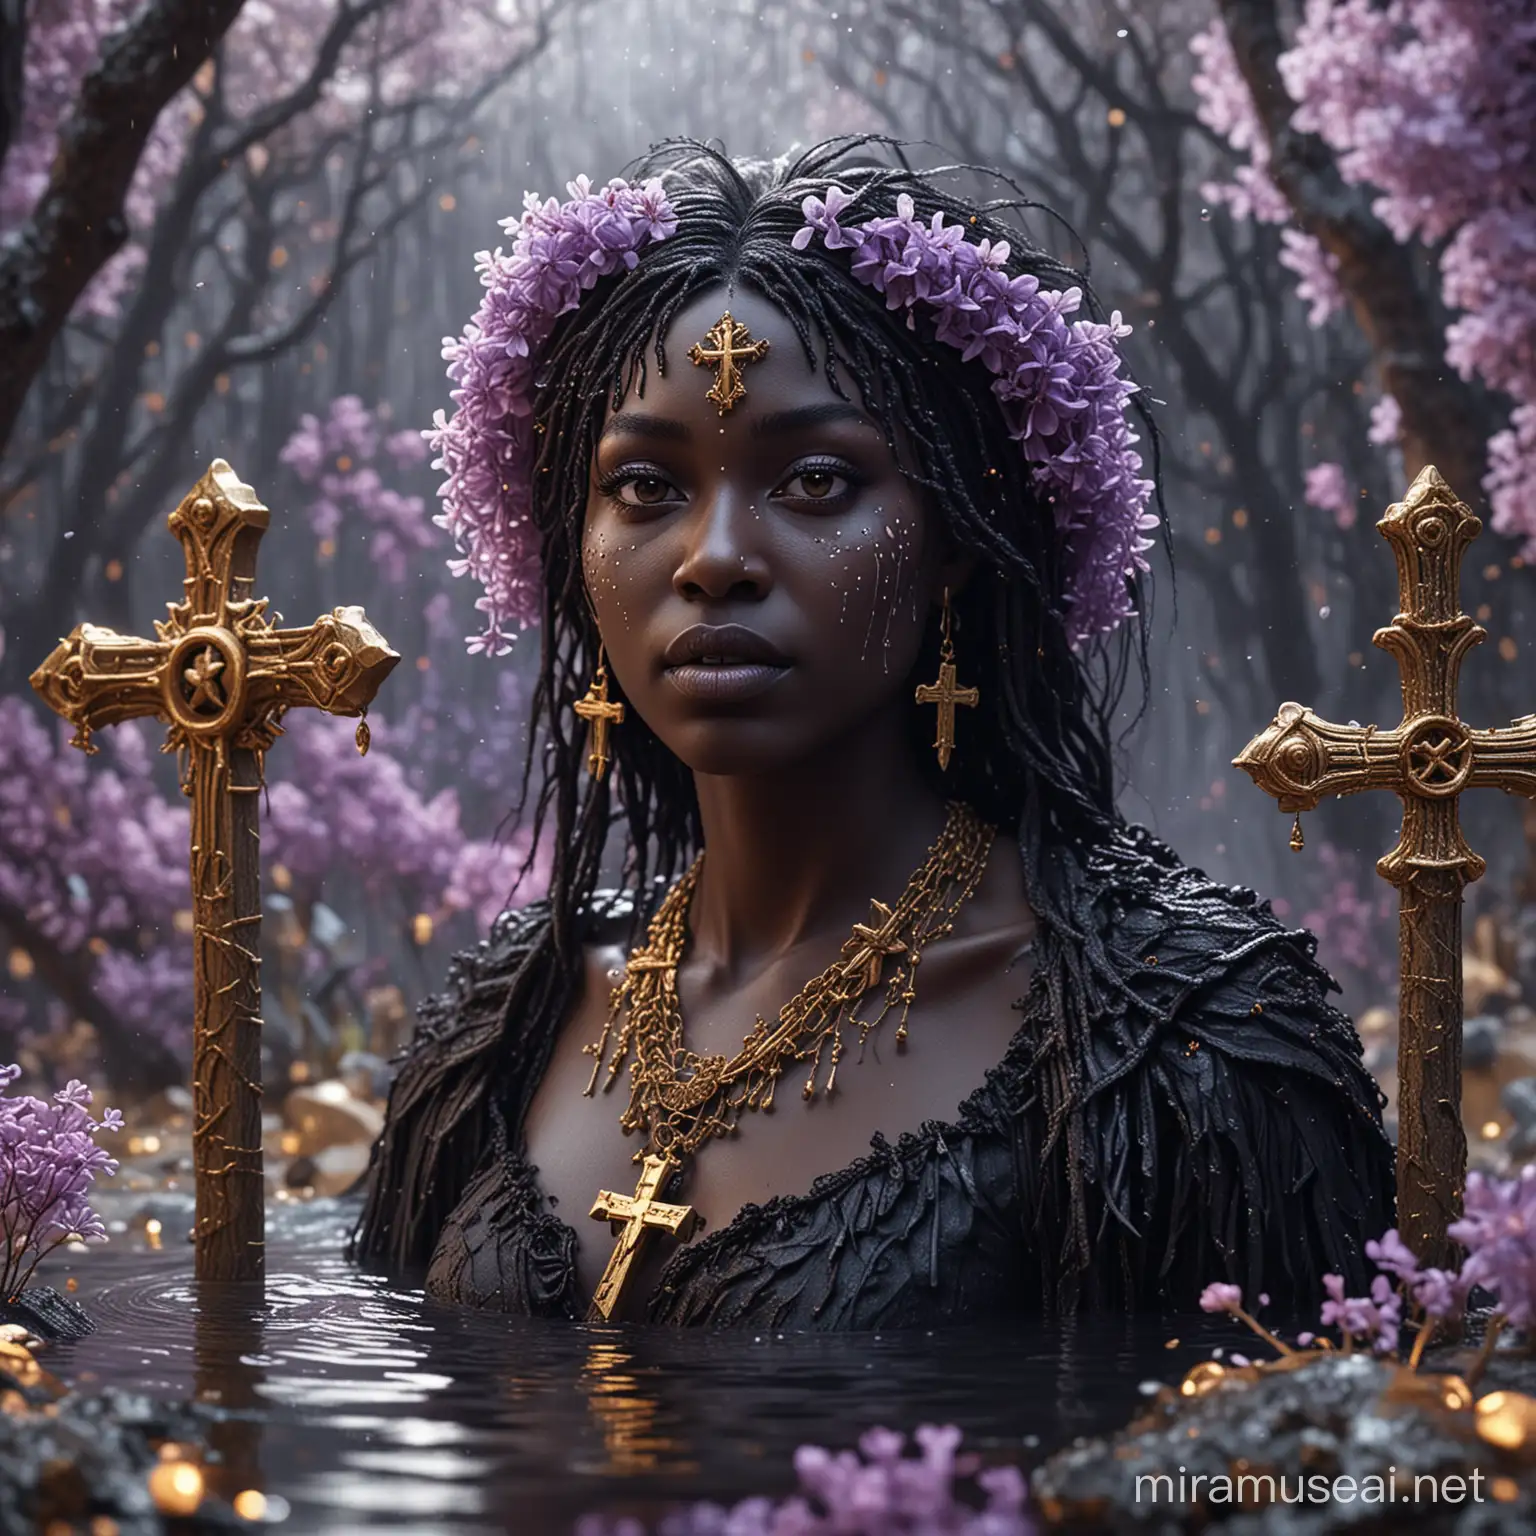 Baba yaga, an Haitian voodoo character, the eternal figure in black, controlling the eternal crossroads at which everyone must someday cross over. Her symbol is the cross upon a tomb. Show her against the background of soft lilac tones with golden decorations, drops of water with glitter 8 k, 3 d, best quality, ultra highres, raw foto in hdr, sharp focus, intricate texture, ultra-detailed, natural lighting,